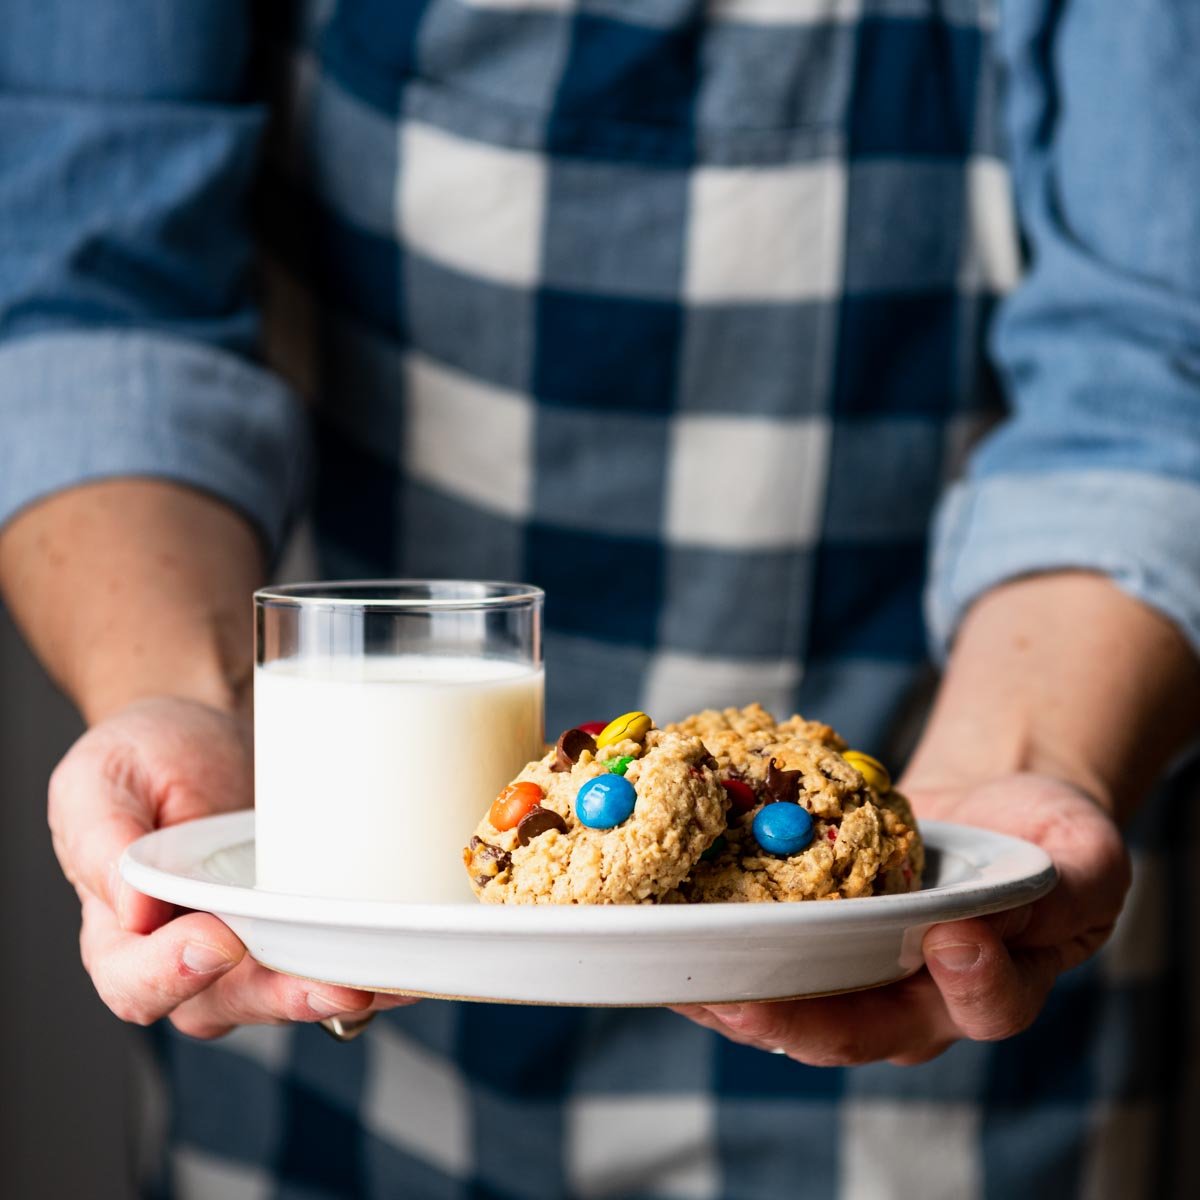 Square front shot of hands serving a white plate of monster cookies and milk